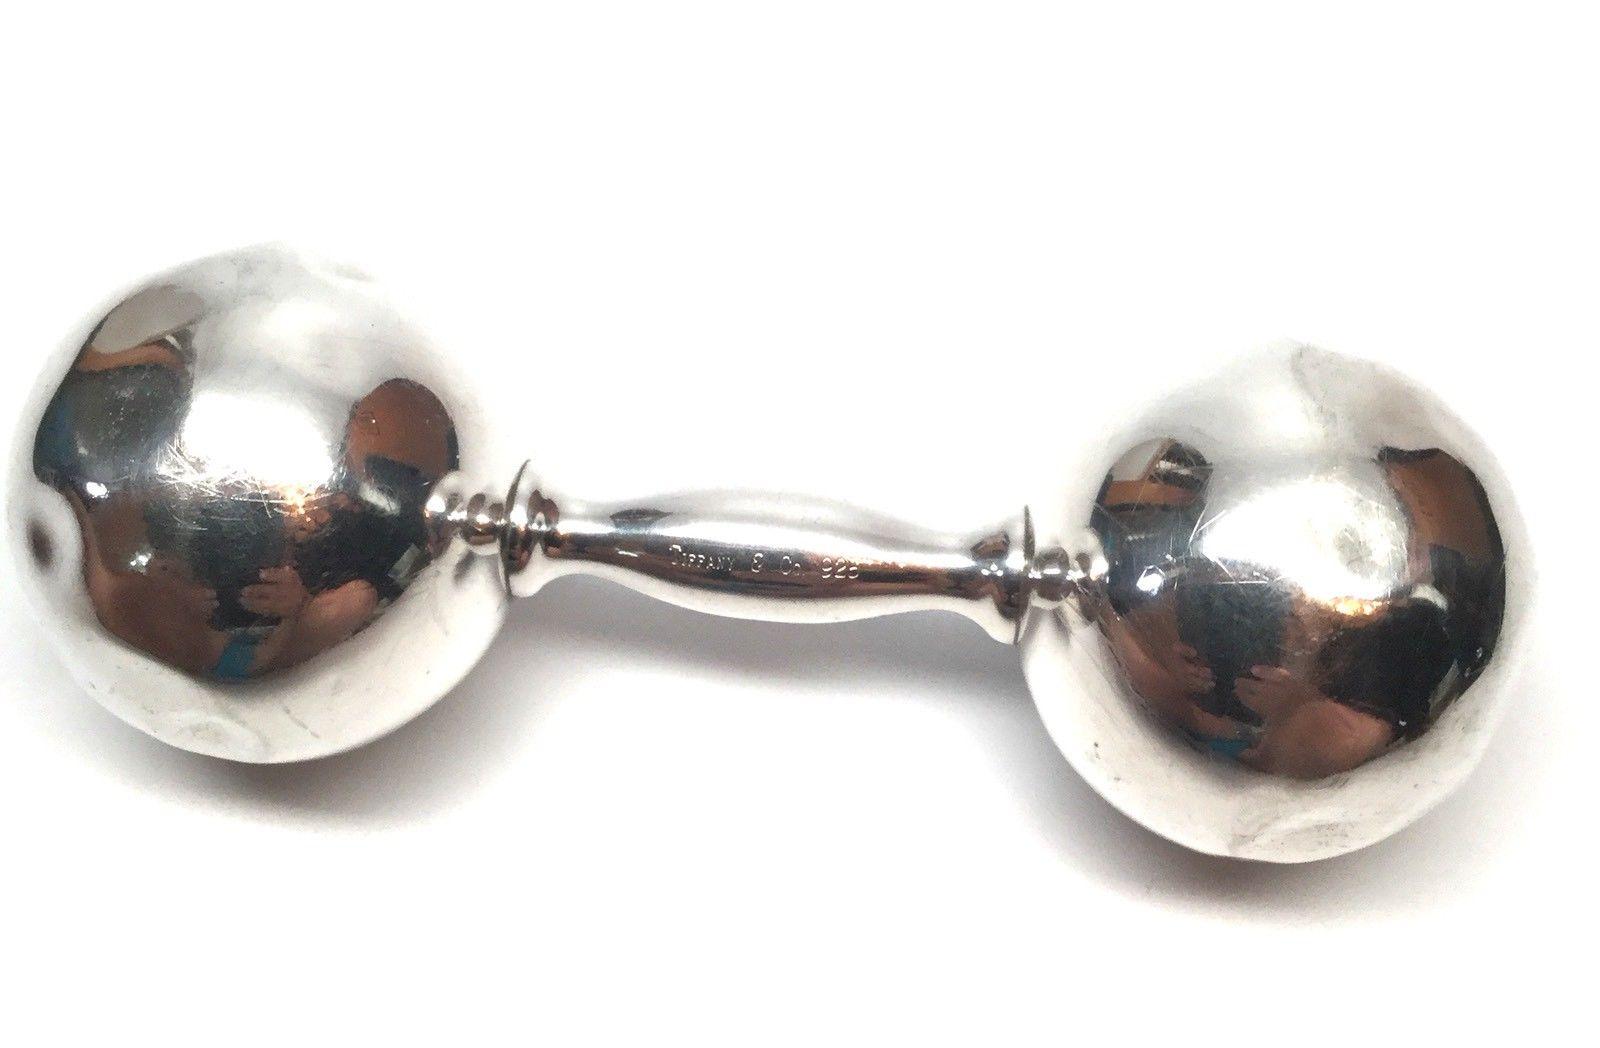 Tiffany & Co. sterling silver dumbbell baby rattle. This is a beautiful and charming sterling silver dumbbell baby rattle designed by Tiffany & Co. It has a soft sweet jingle when you shake it. Measures: Approximate 5 inches long. Weight: 72.9 g /